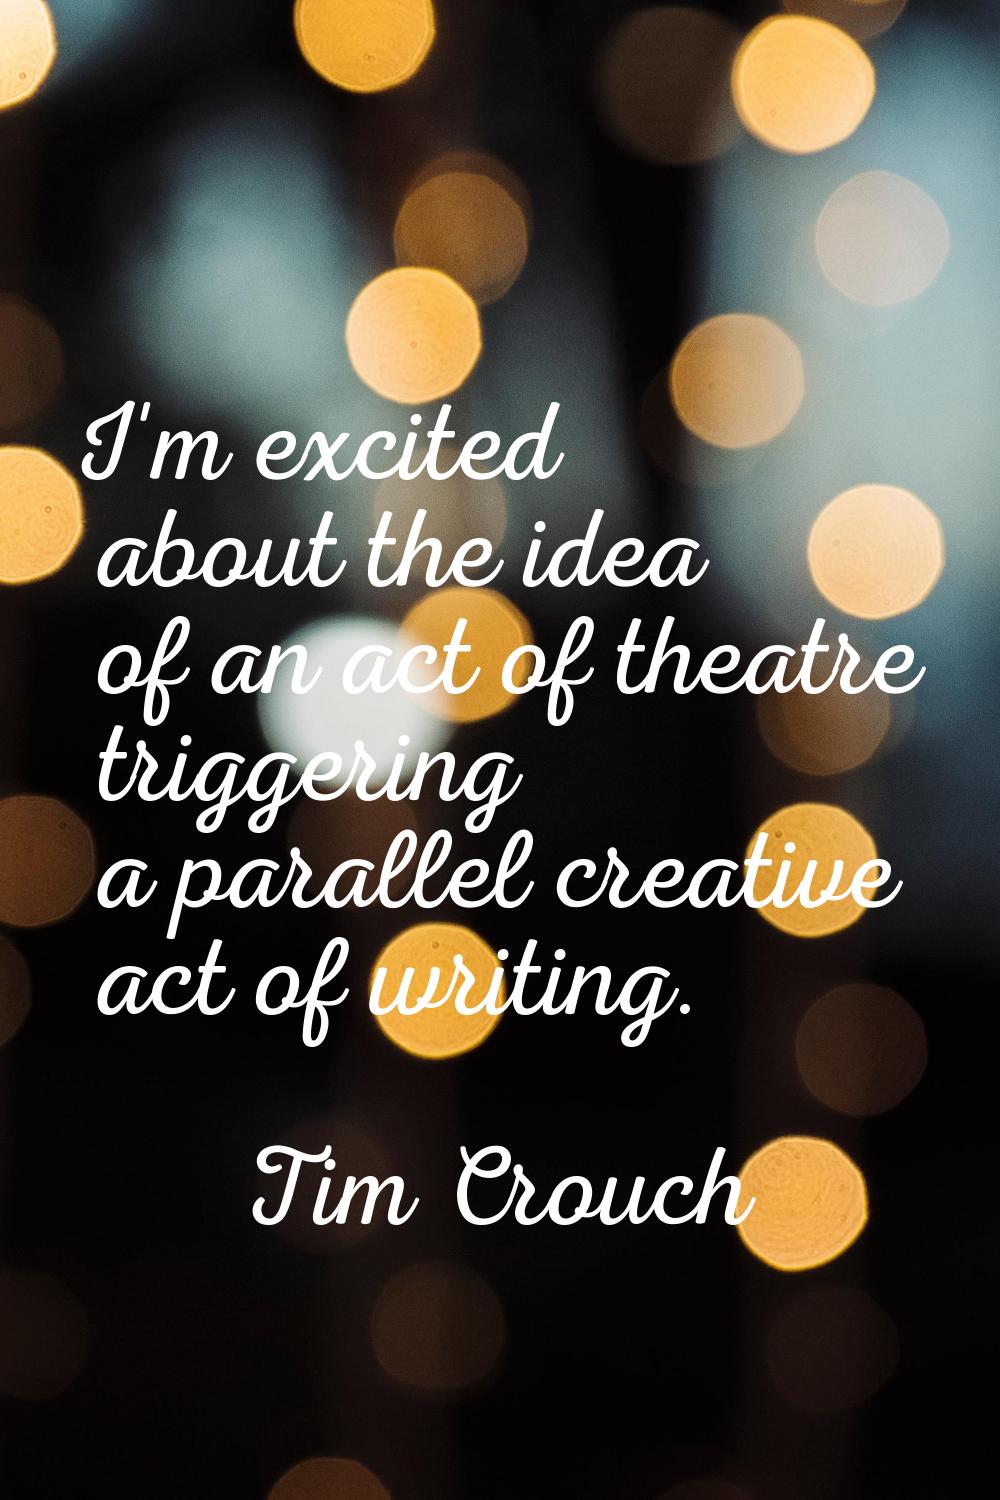 I'm excited about the idea of an act of theatre triggering a parallel creative act of writing.